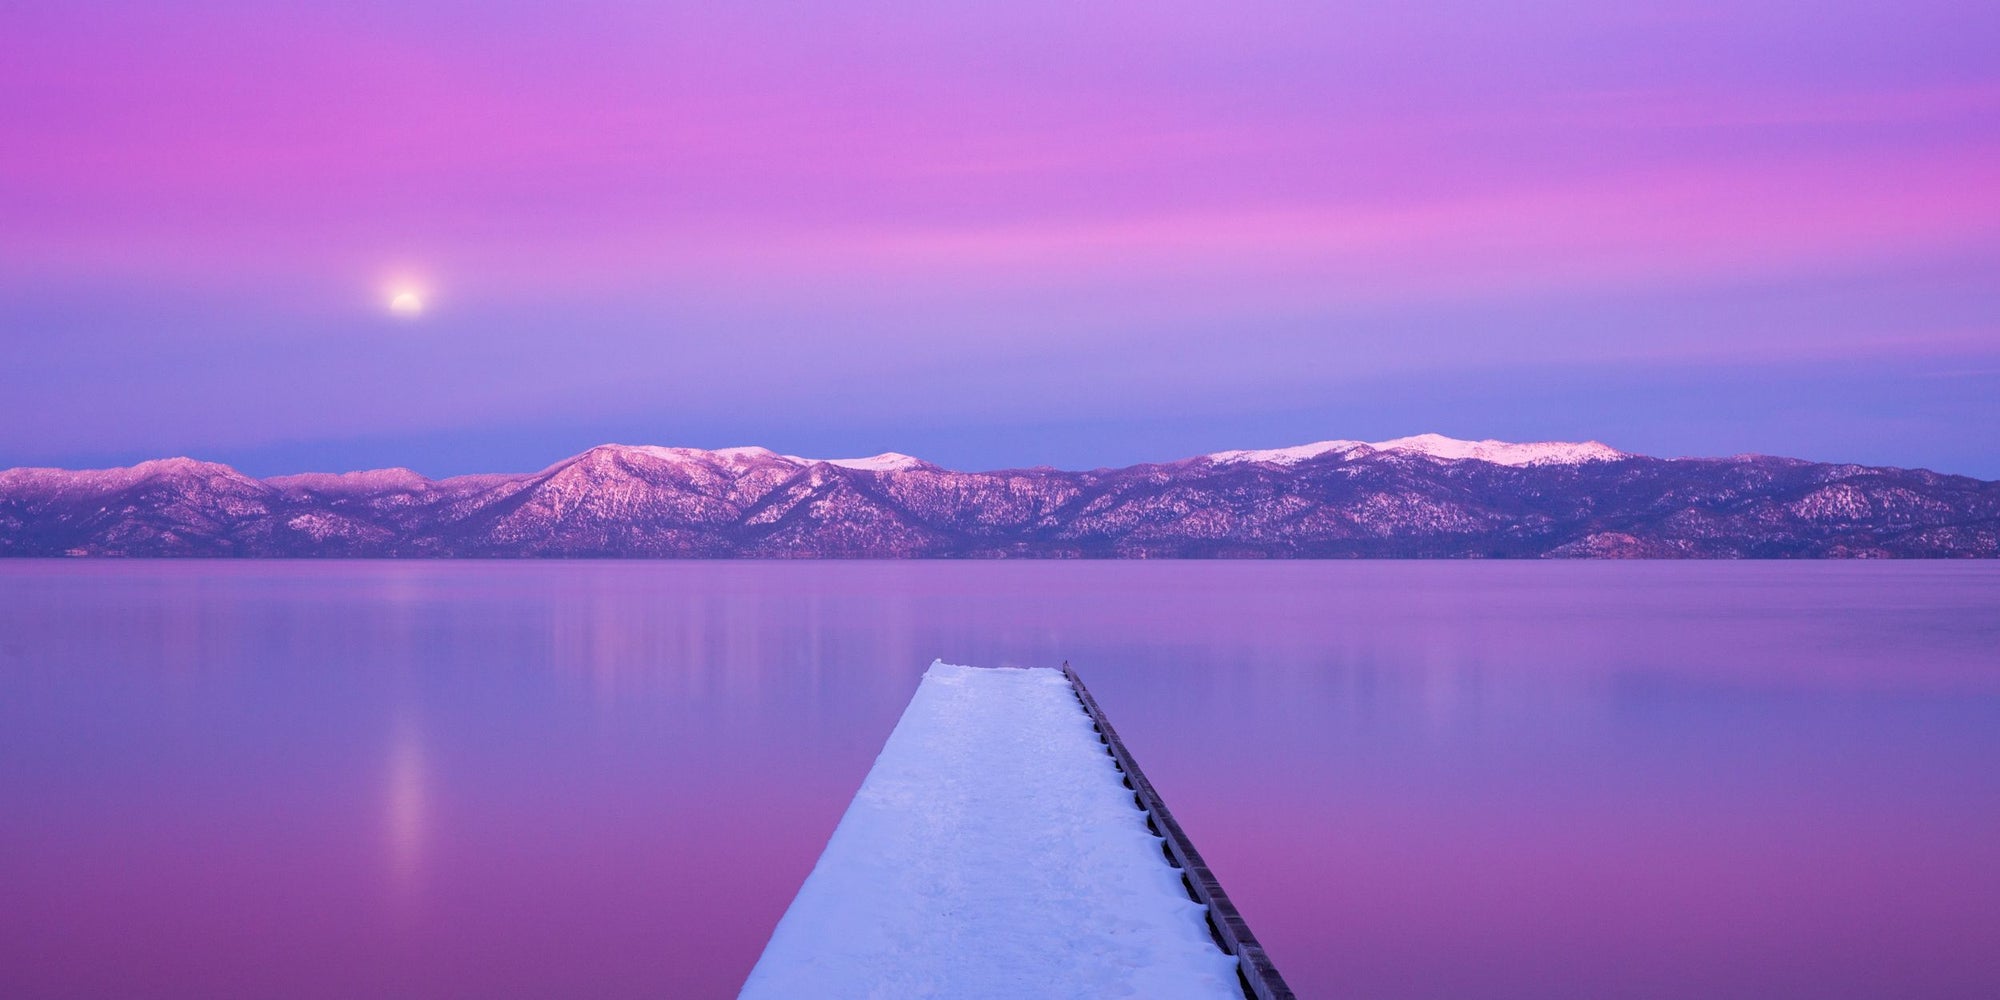 A snow covered dock juts out into Lake Tahoe as the sun sets and casts pink and purple hues across the landscape.